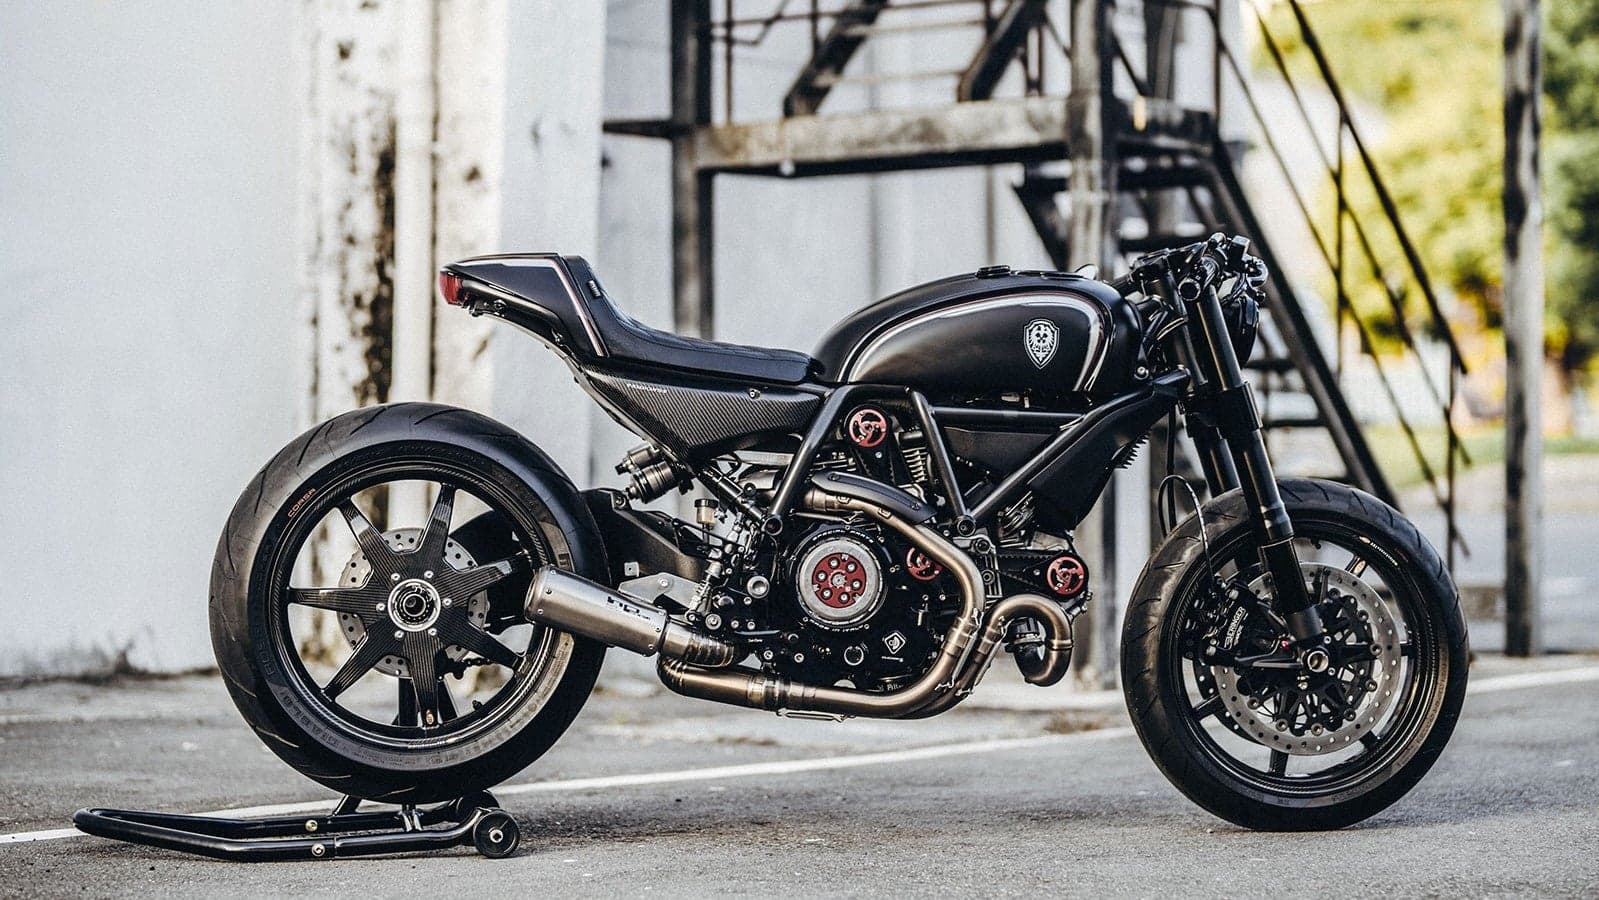 Check Out This Custom ‘Jab Launcher’ Motorcycle by Rough Crafts